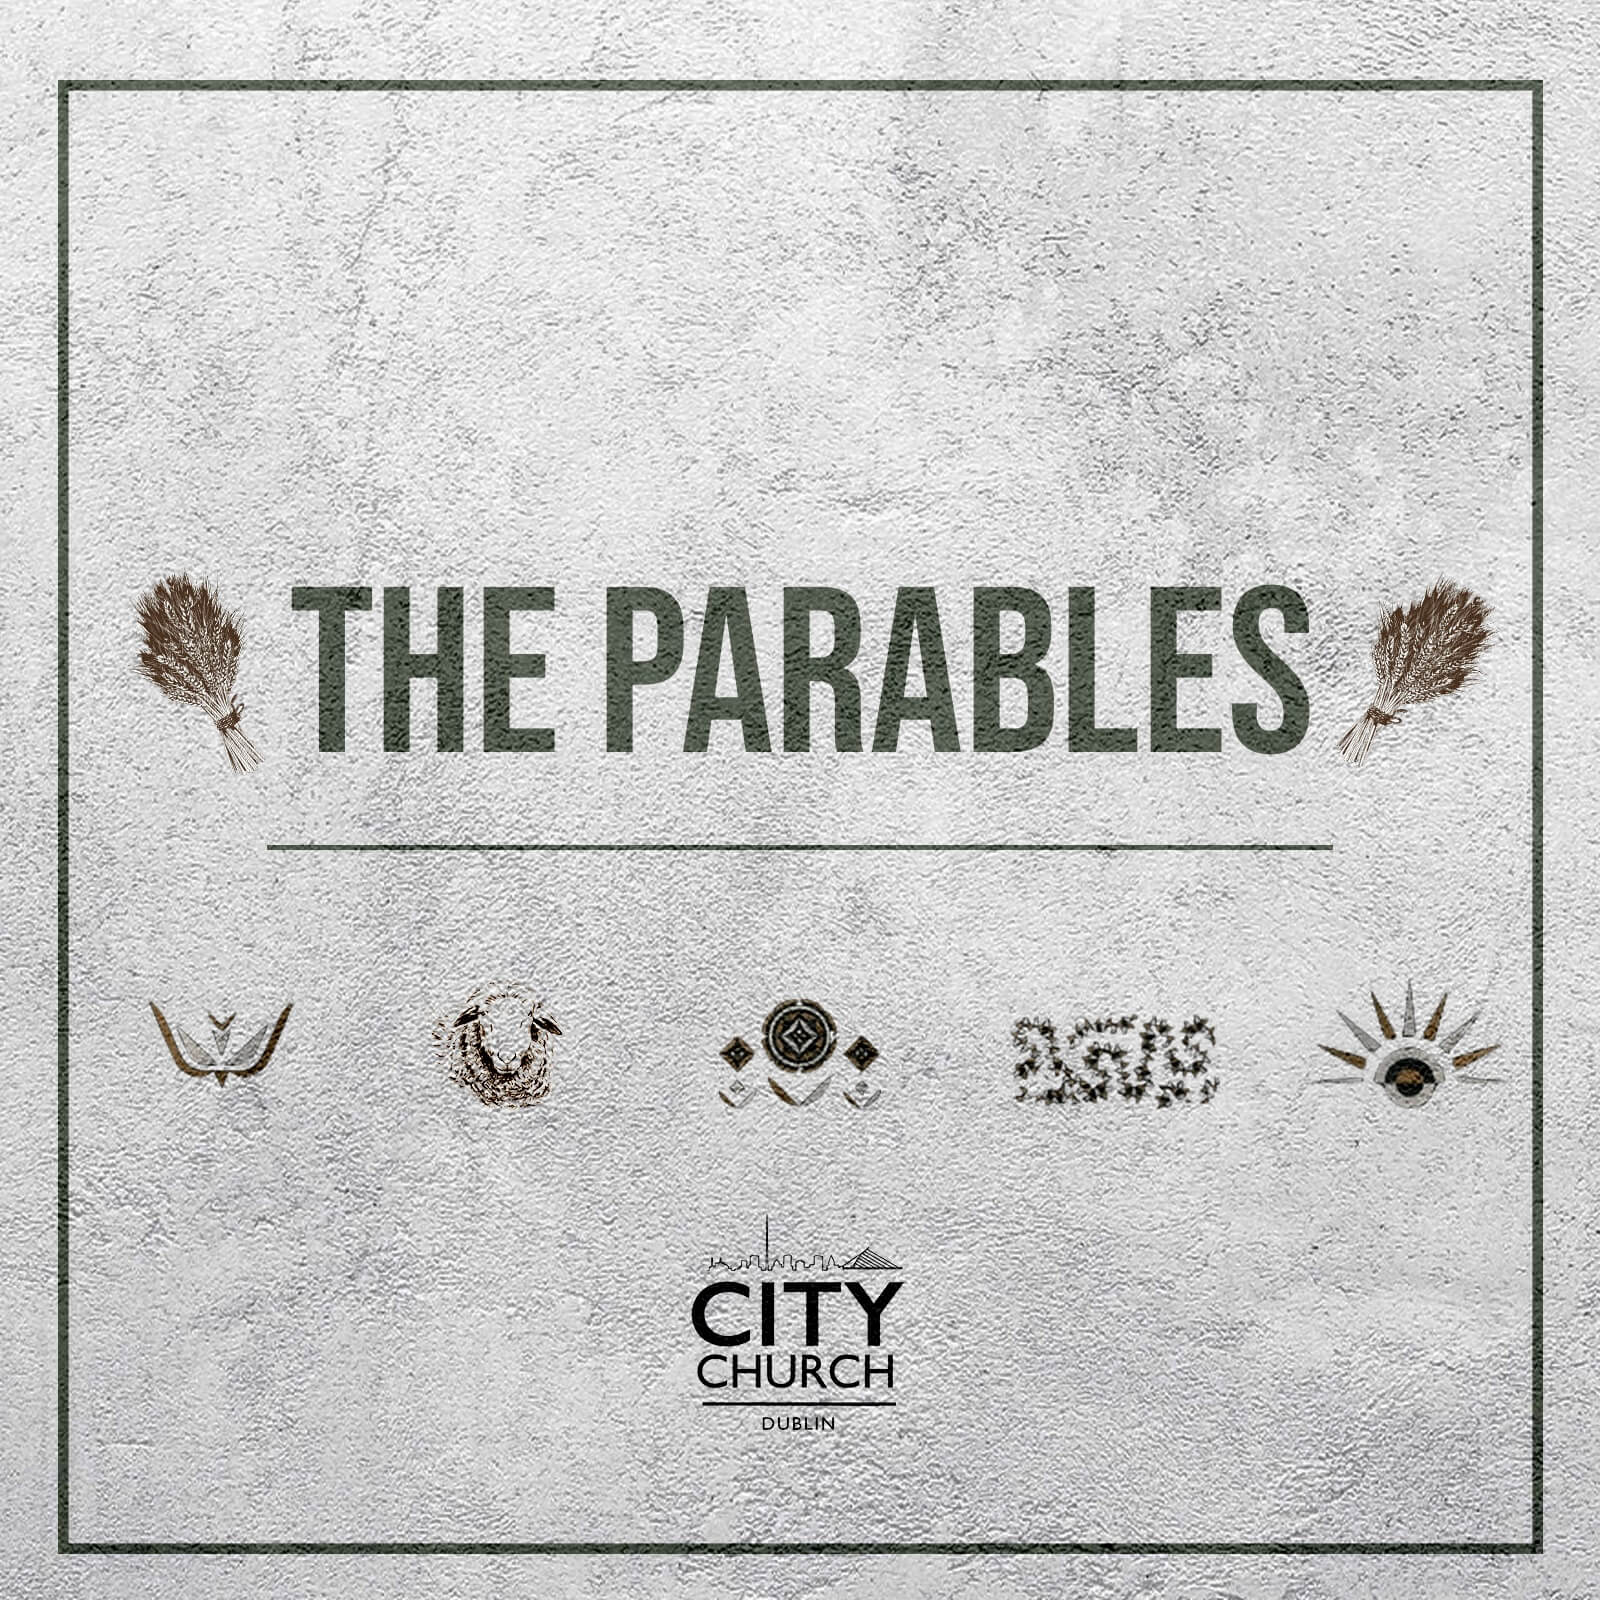 Matthew 13:24-30 & 36-43 - The Parables